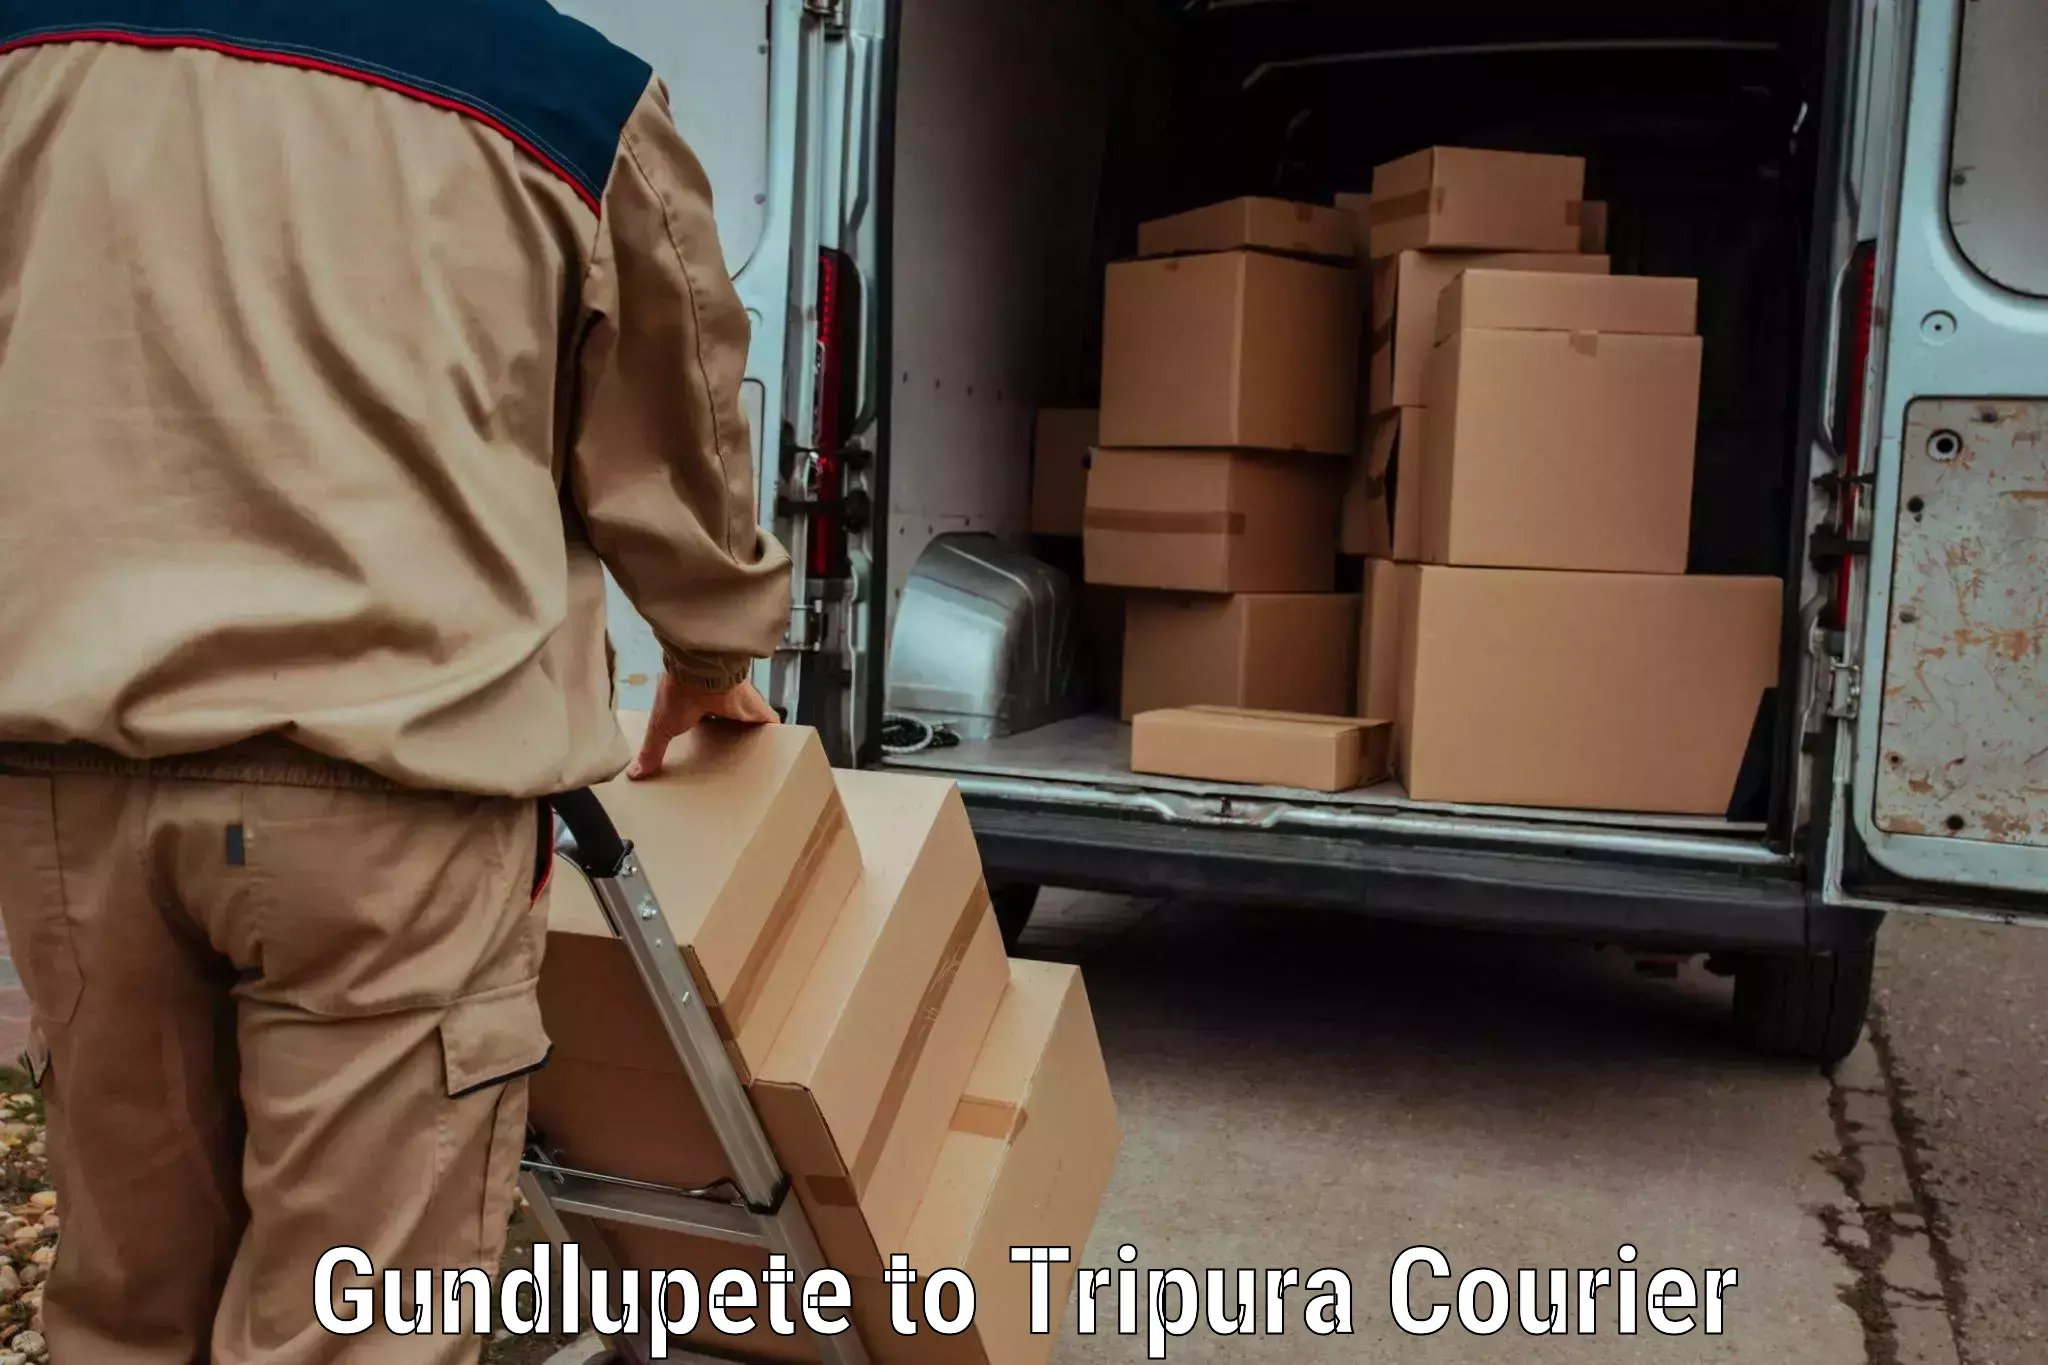 Remote area delivery Gundlupete to Udaipur Tripura